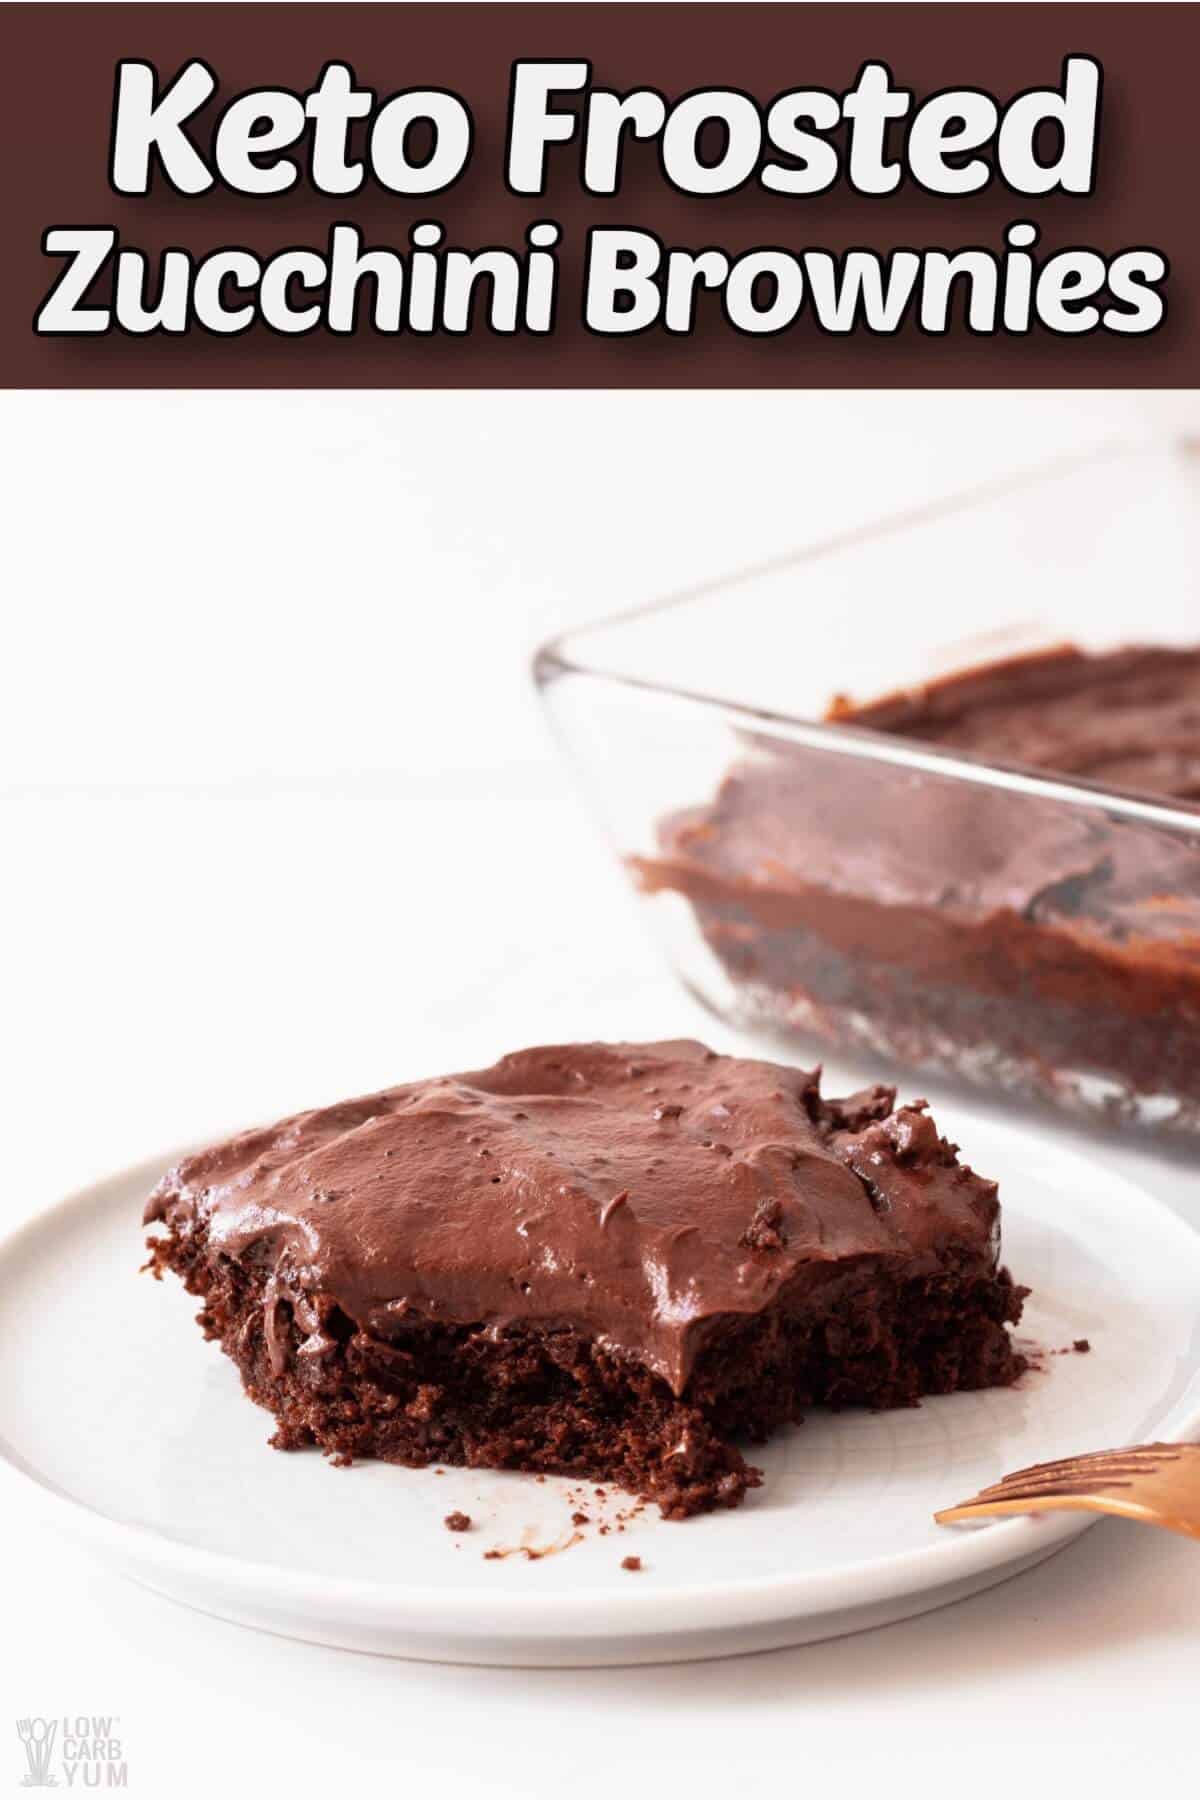 keto chocolate zucchini brownies with frosting cover image